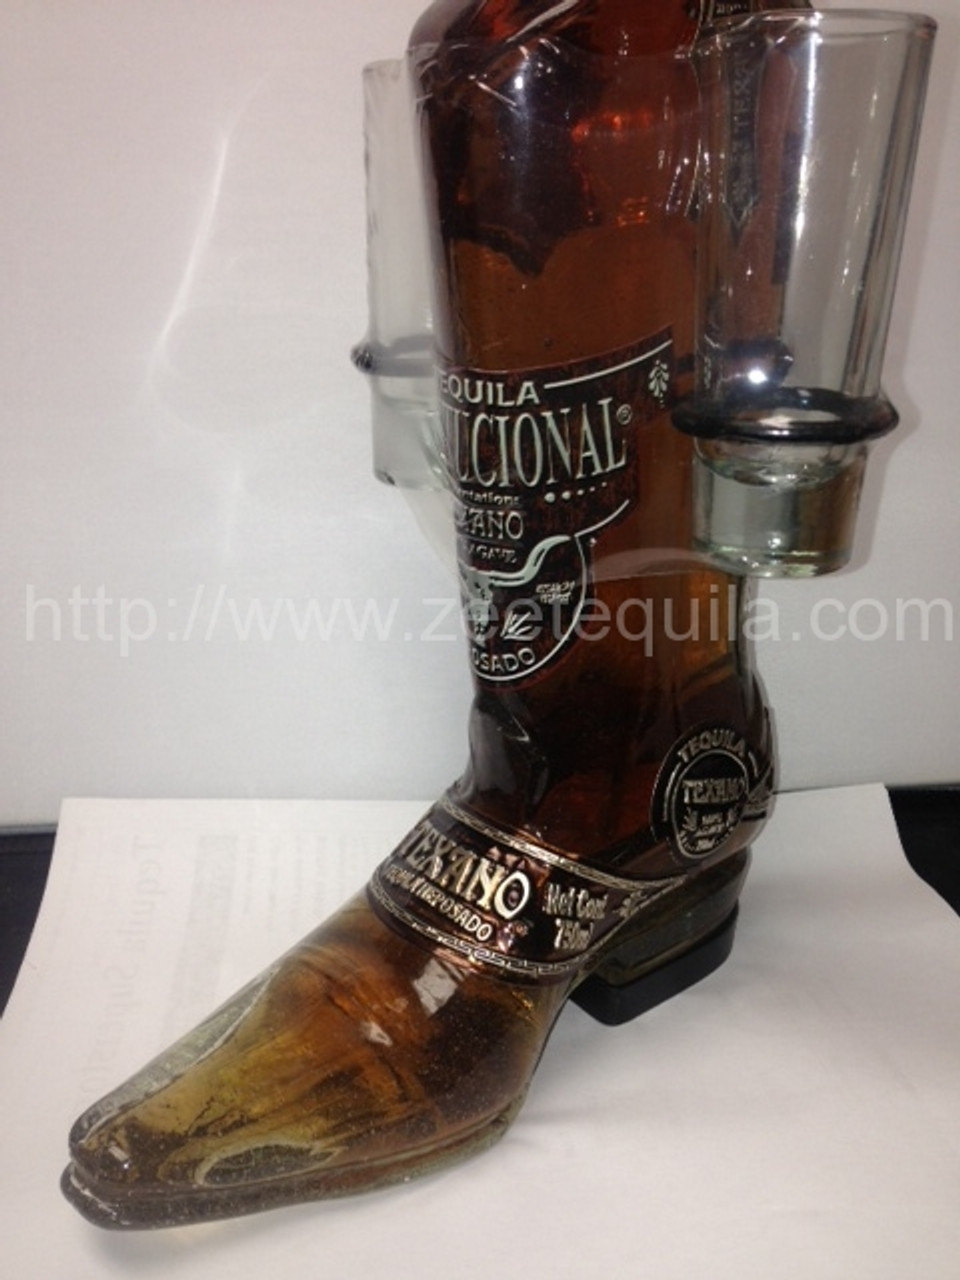 Texano Tequila Gold Boot Shape bottle